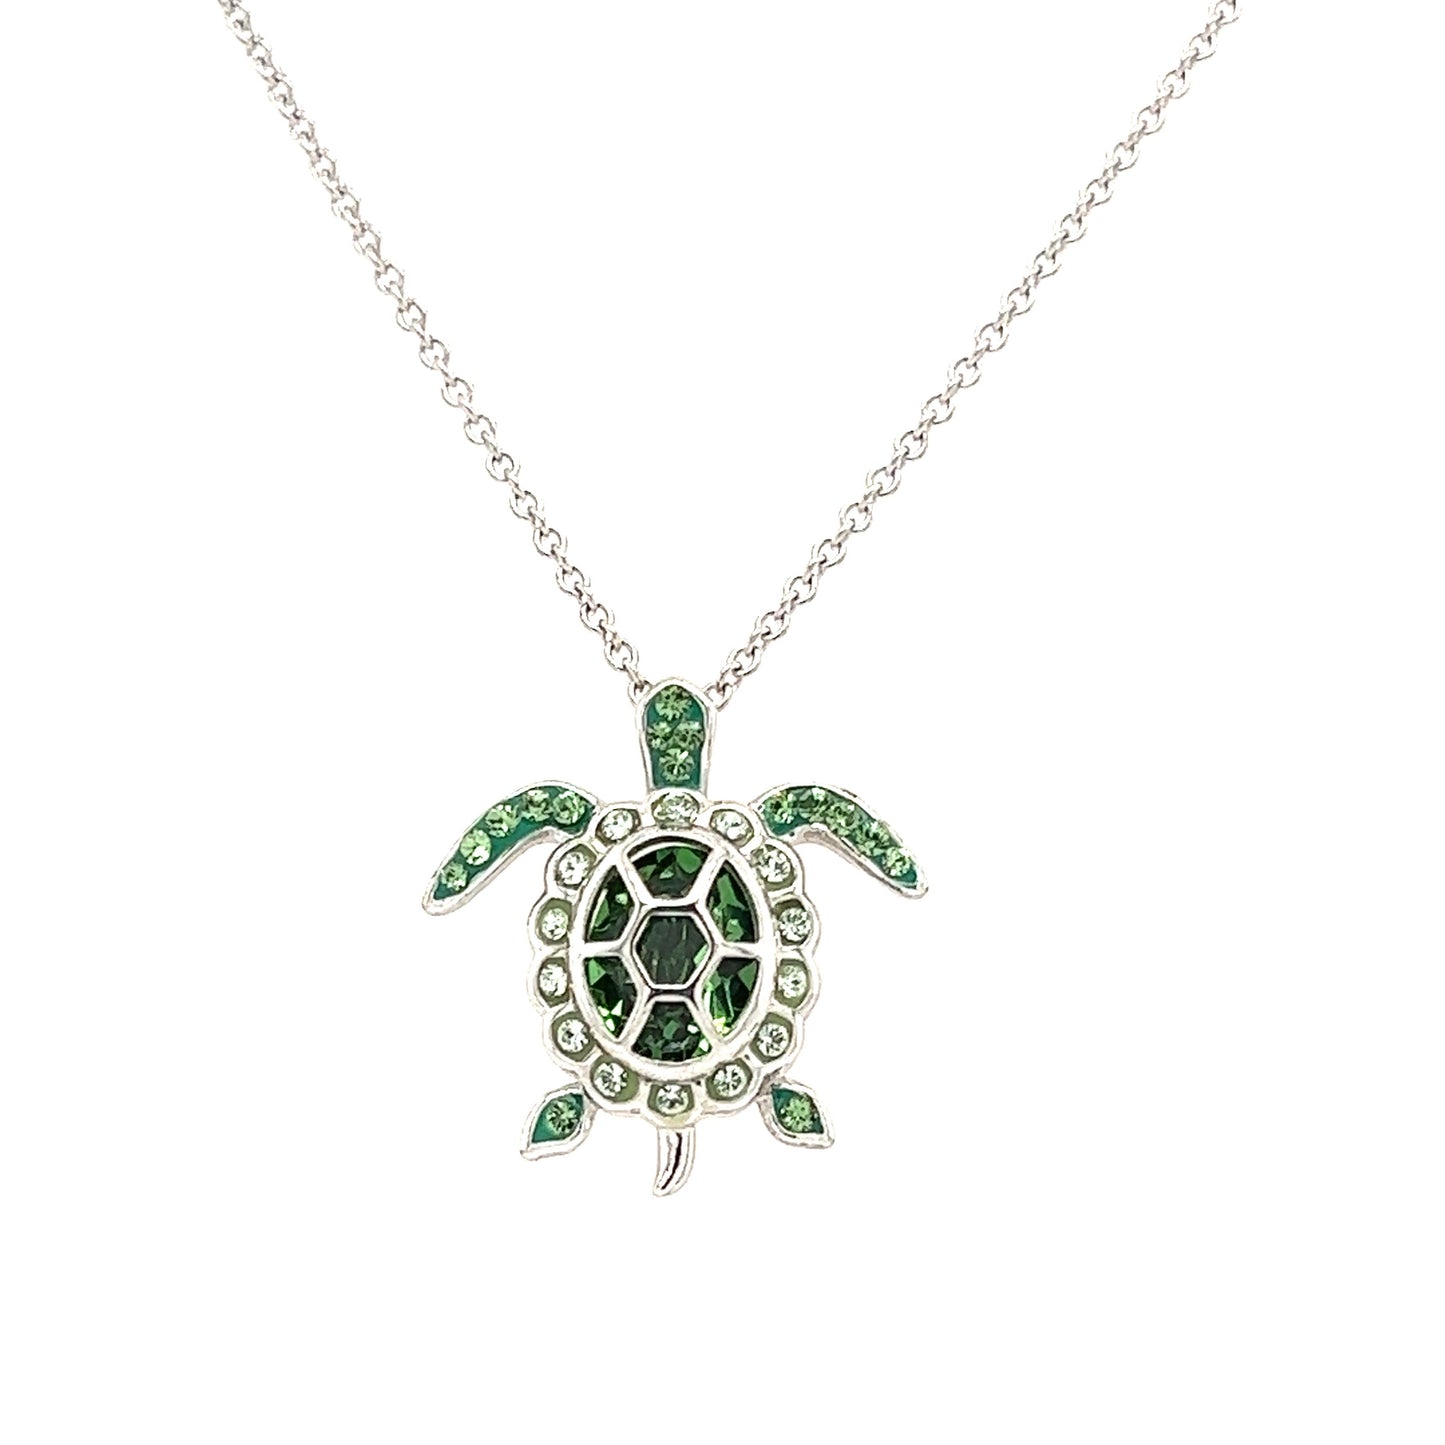 Sea Turtle Necklace with Light Green Crystals in Sterling Silver. Necklace Front View